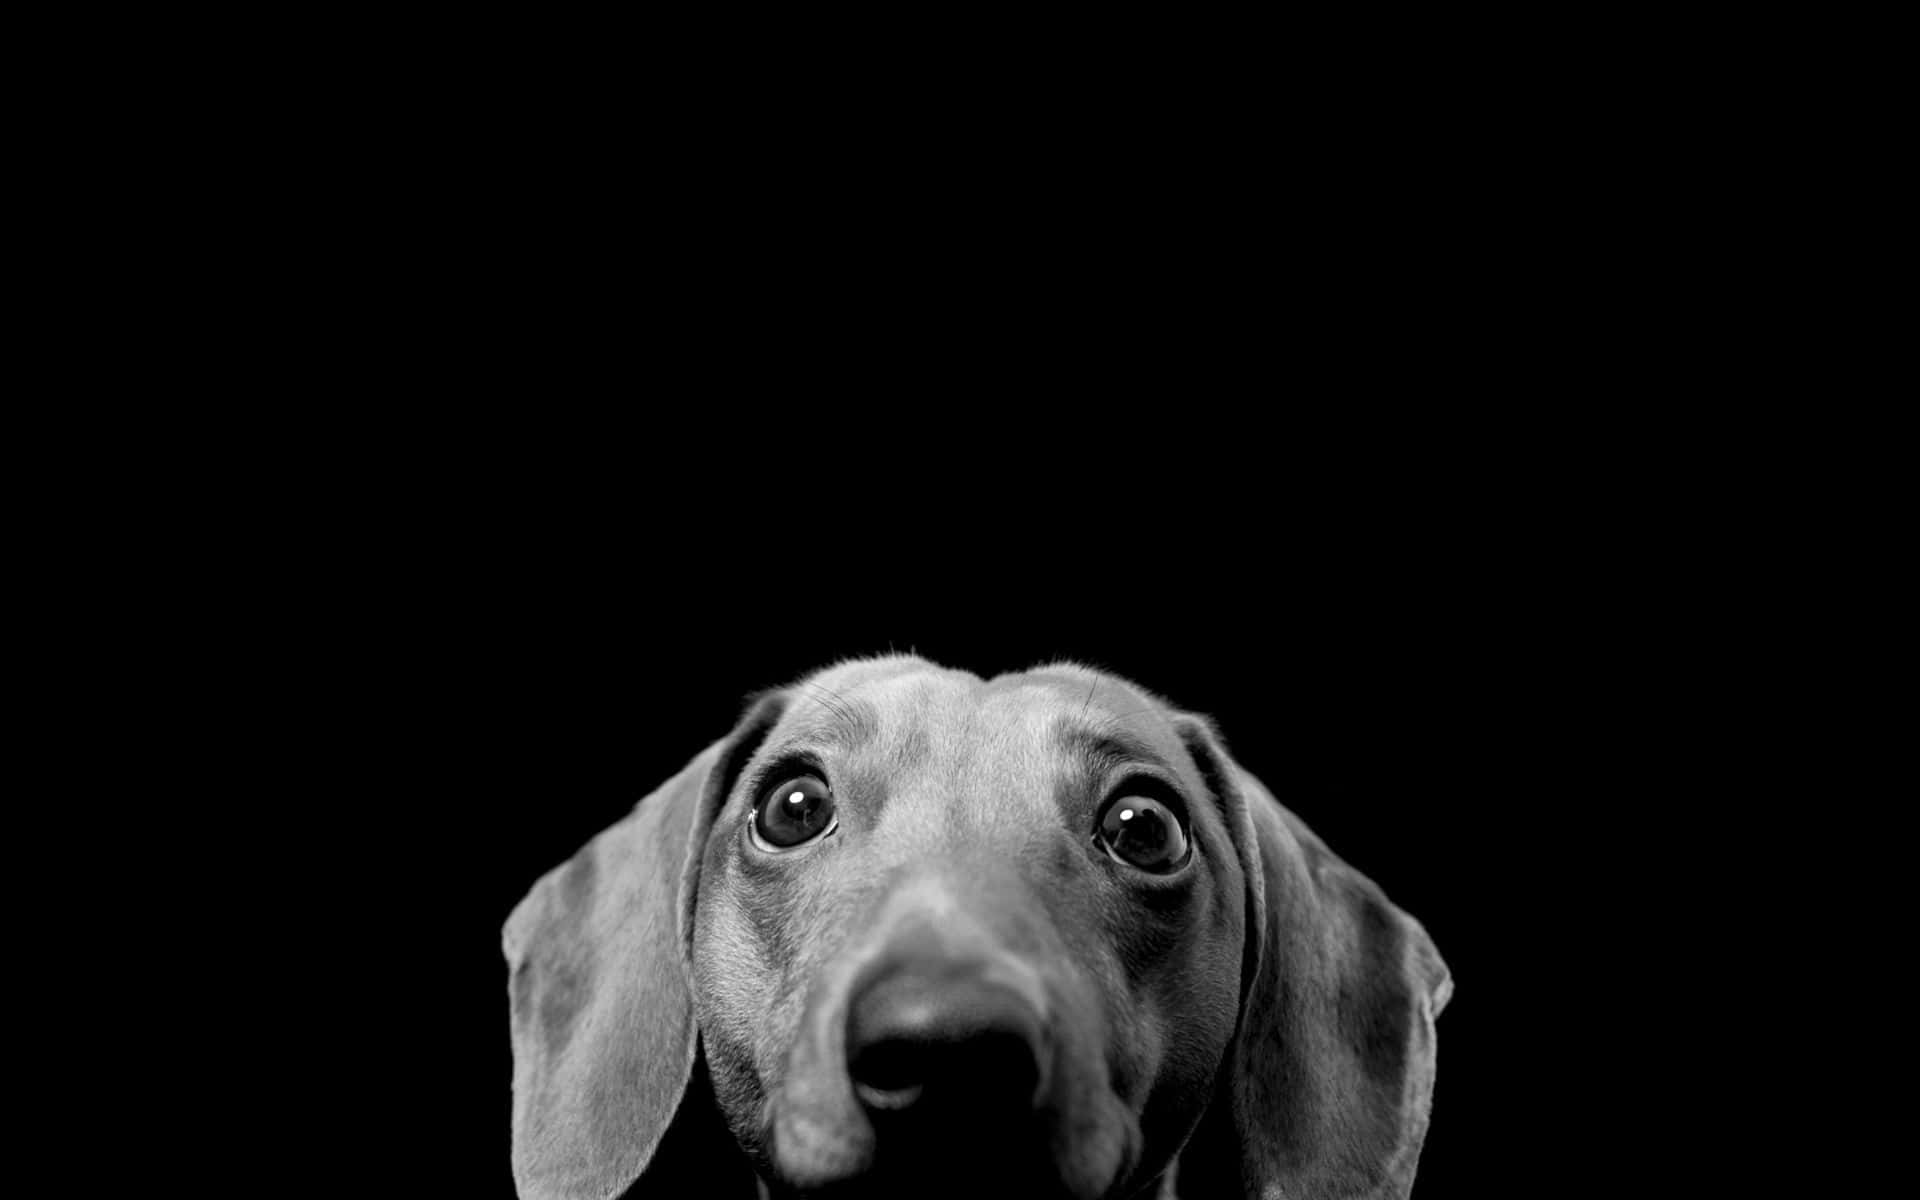 A Dog Is Looking At The Camera In Black And White